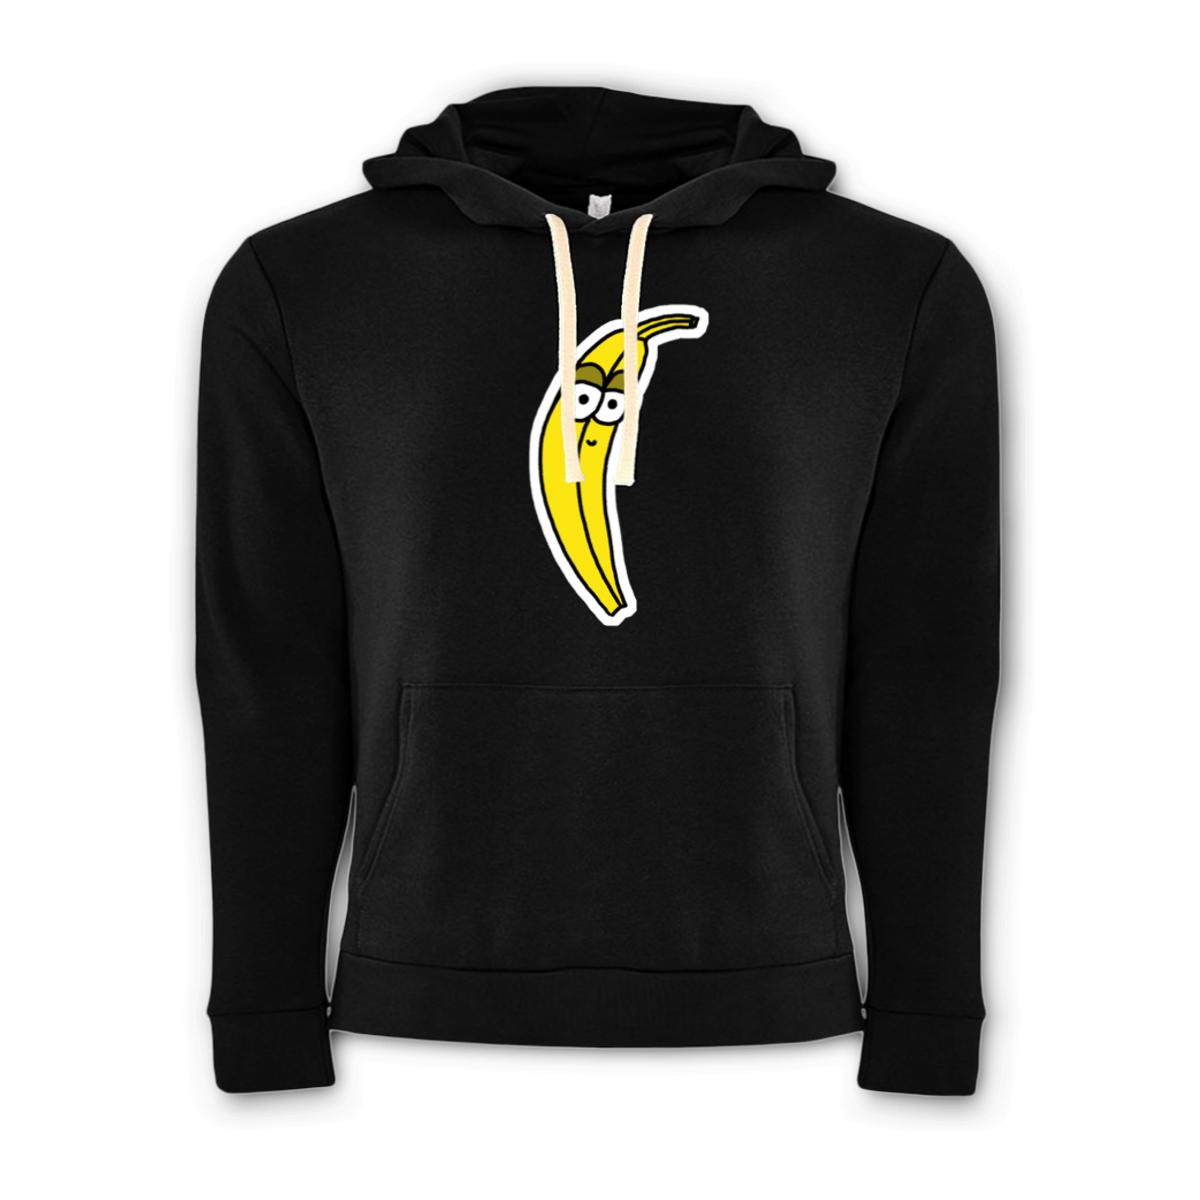 Plantain Unisex Pullover Hoodie Small black